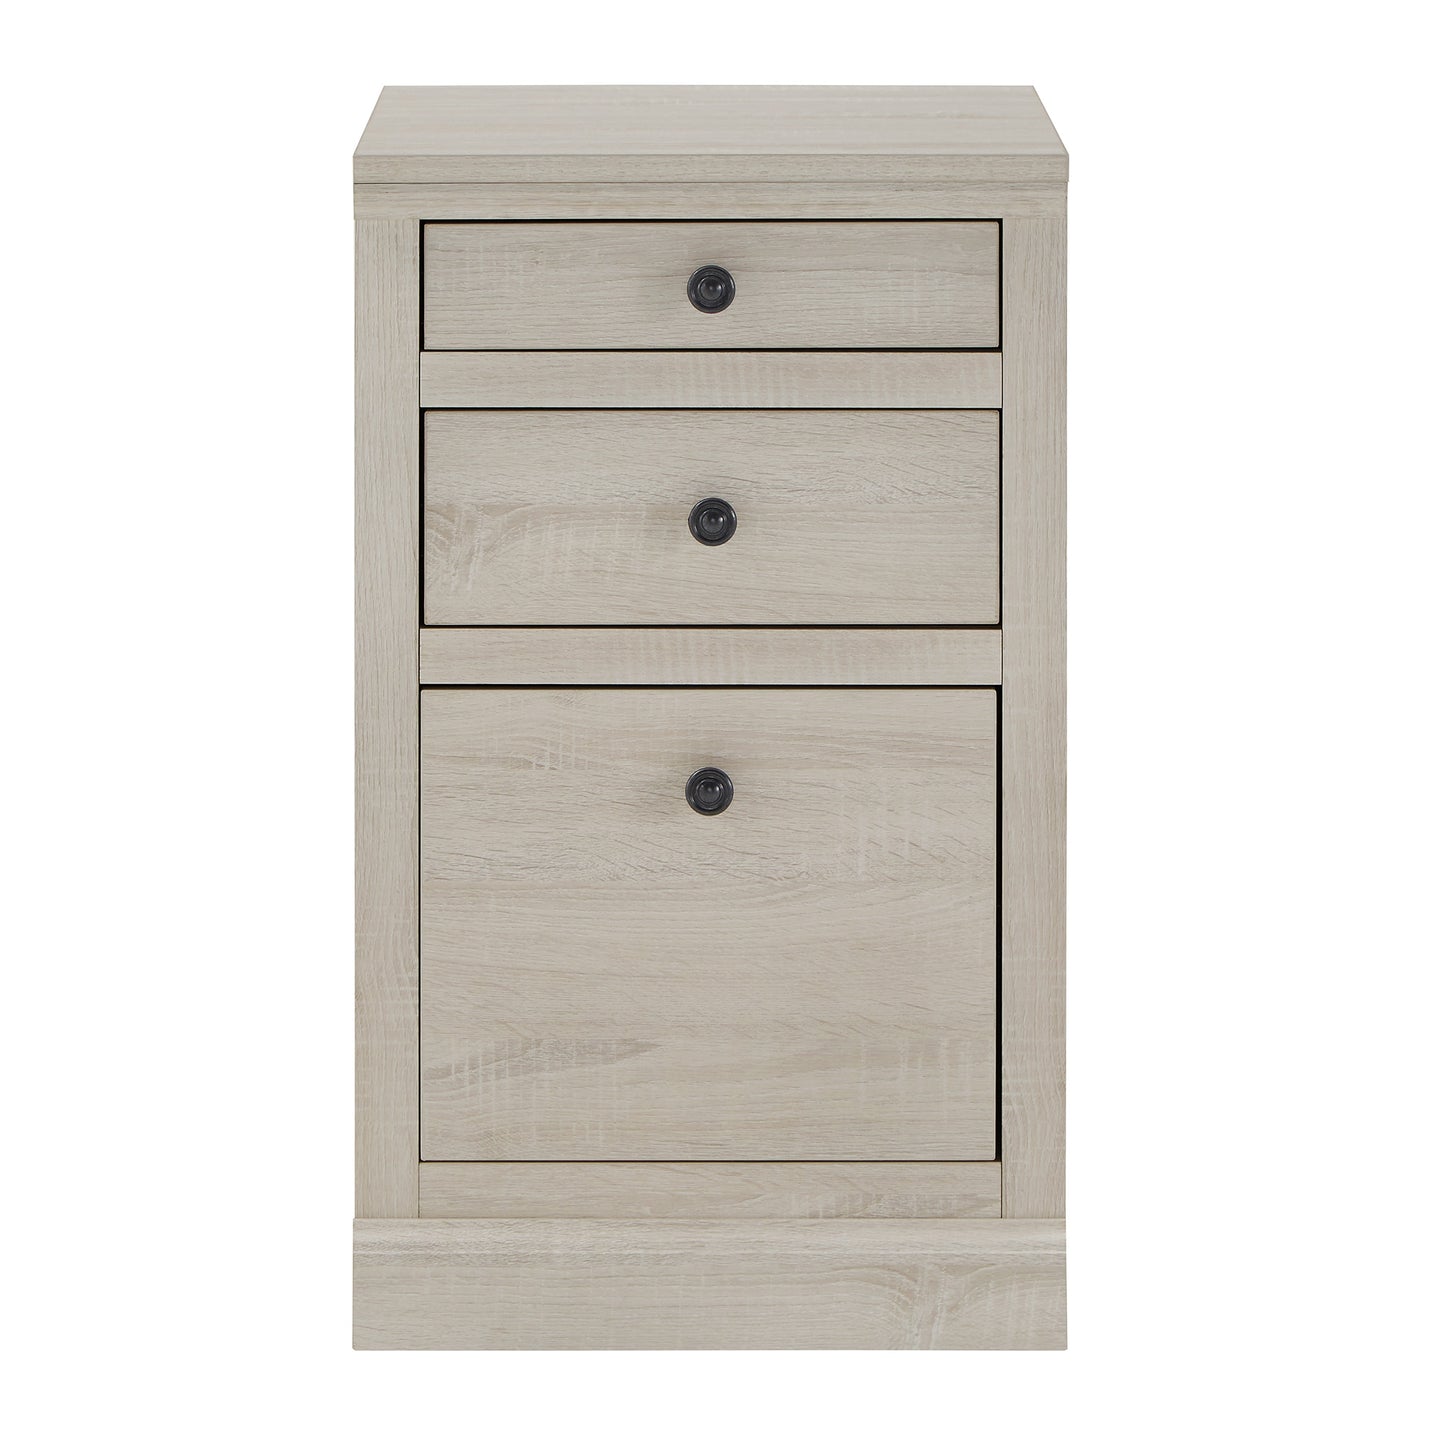 40 in. Corner Desk with USB Chargers and 3-drawer File Cabinet - Antique White Finish